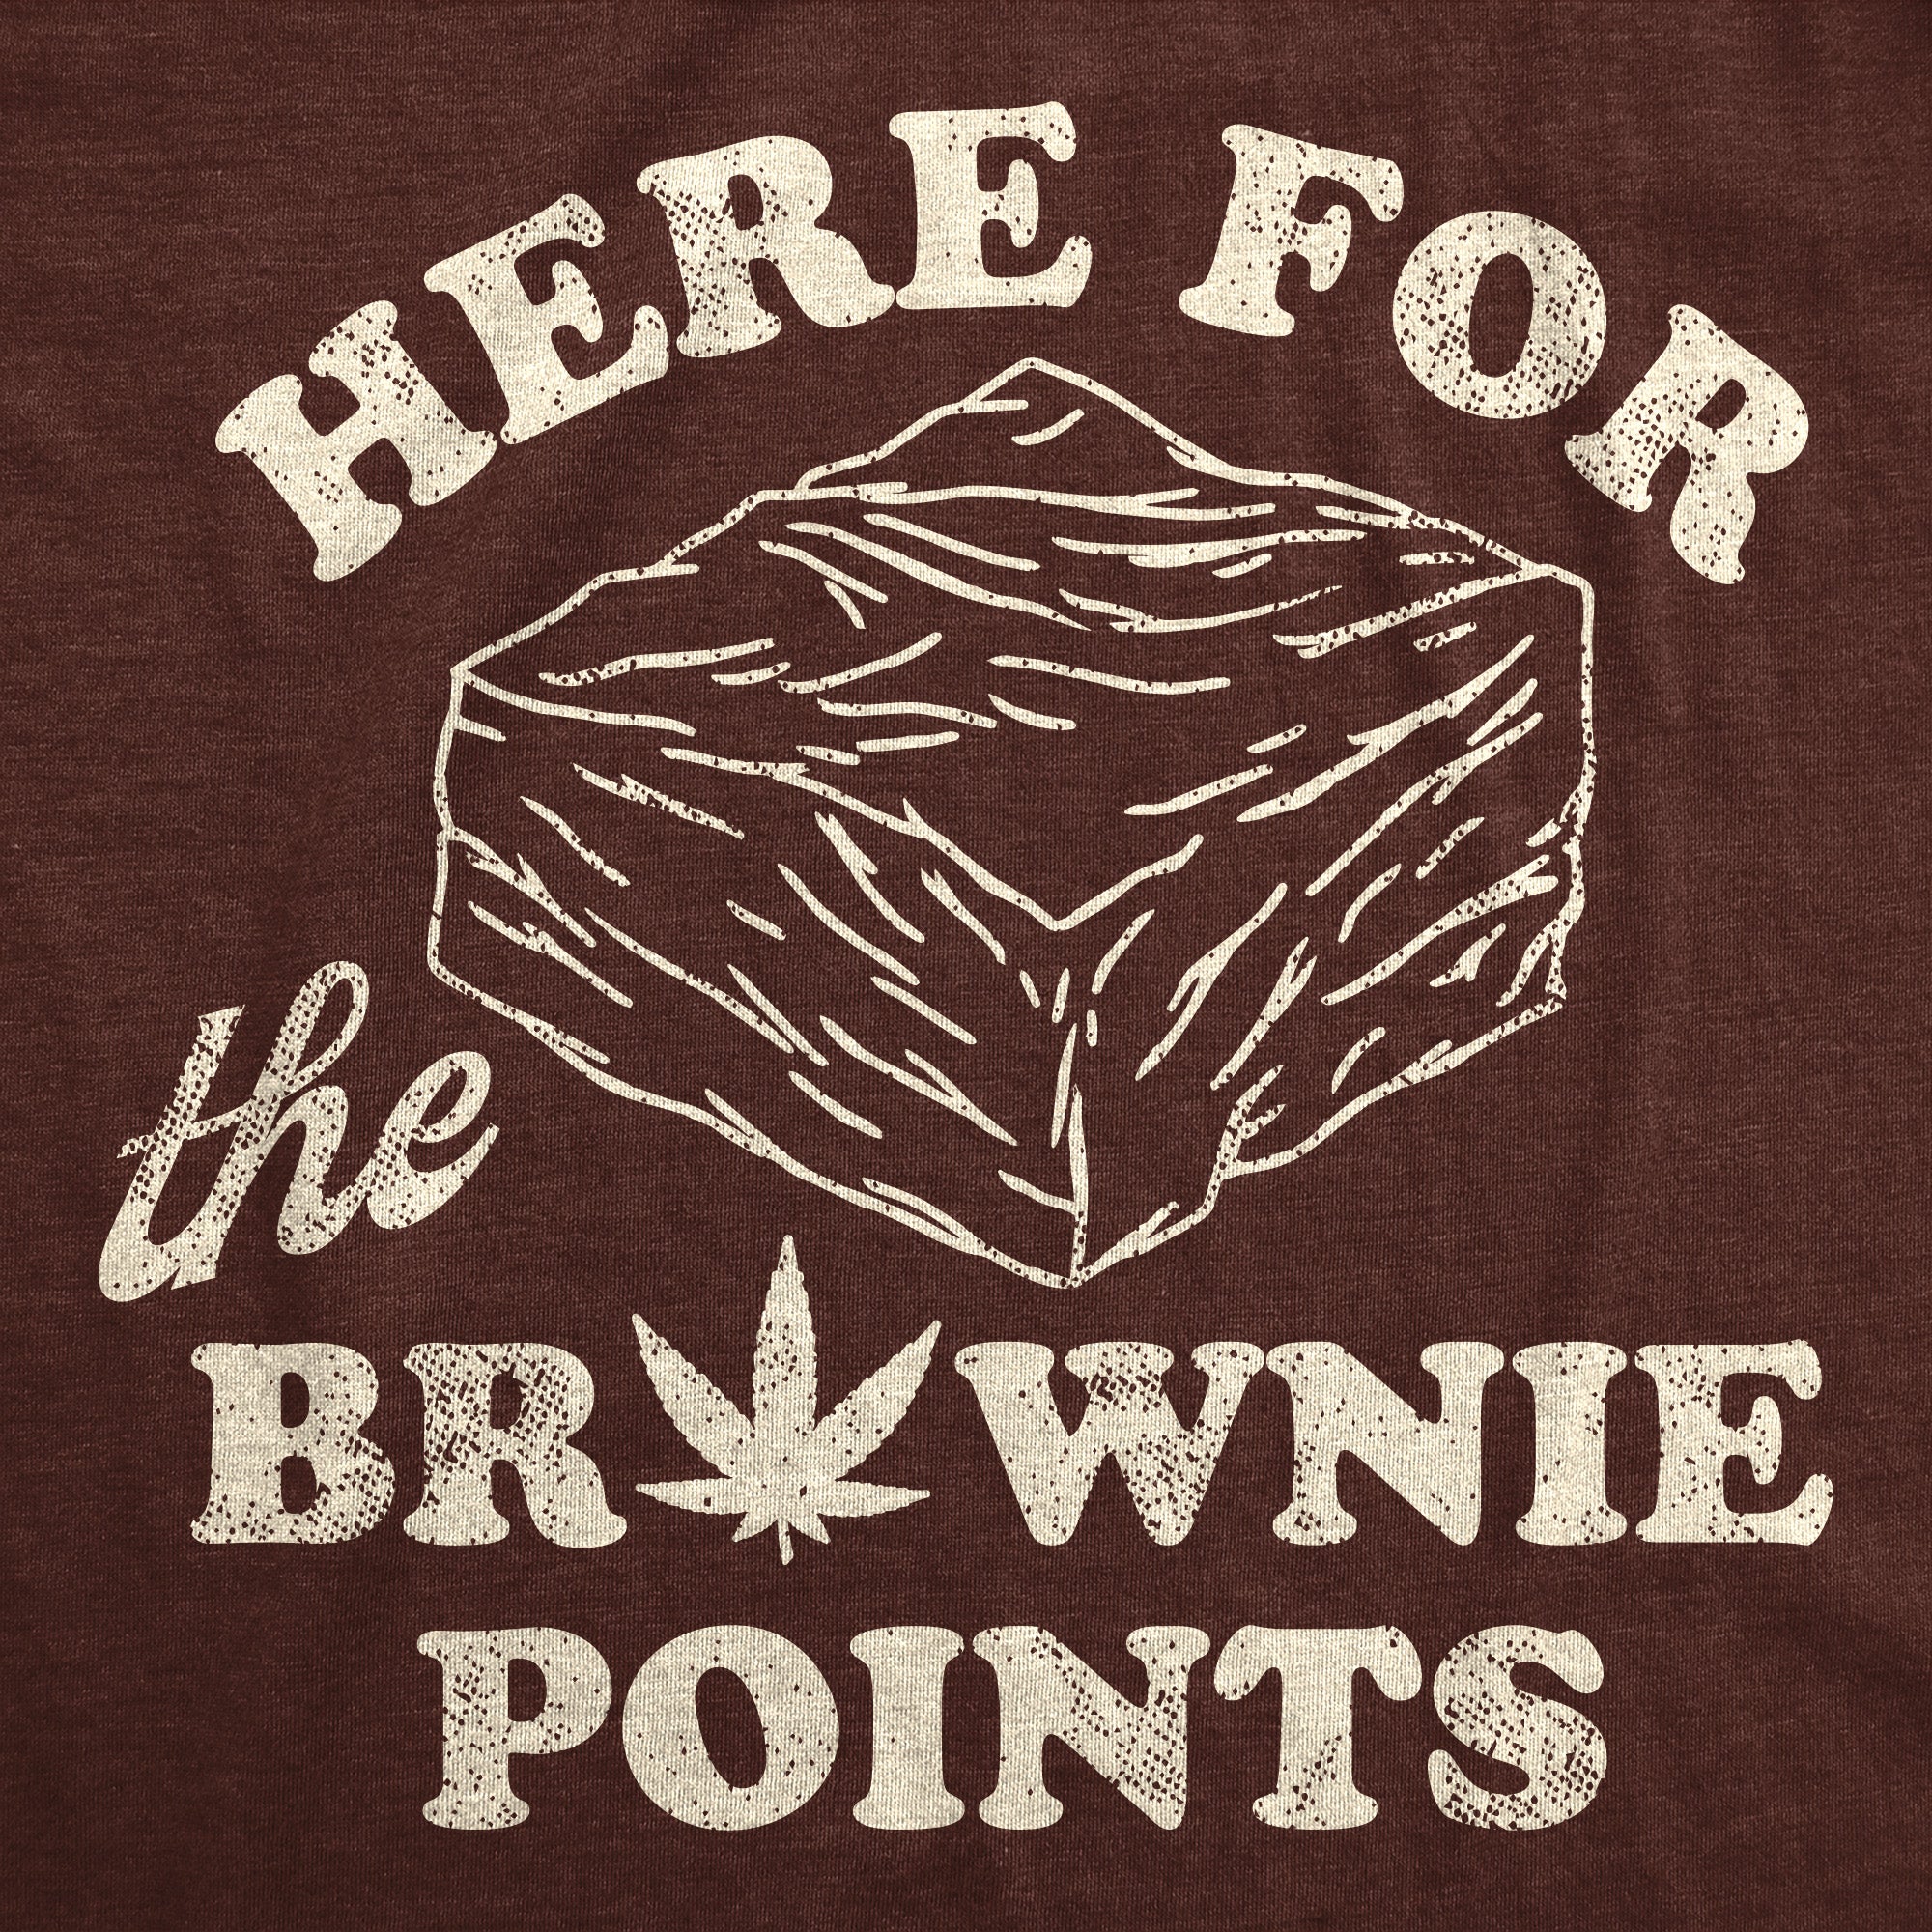 Funny Heather Brown - Here For The Brownie Points Here For The Brownie Points Mens T Shirt Nerdy 420 sarcastic Tee